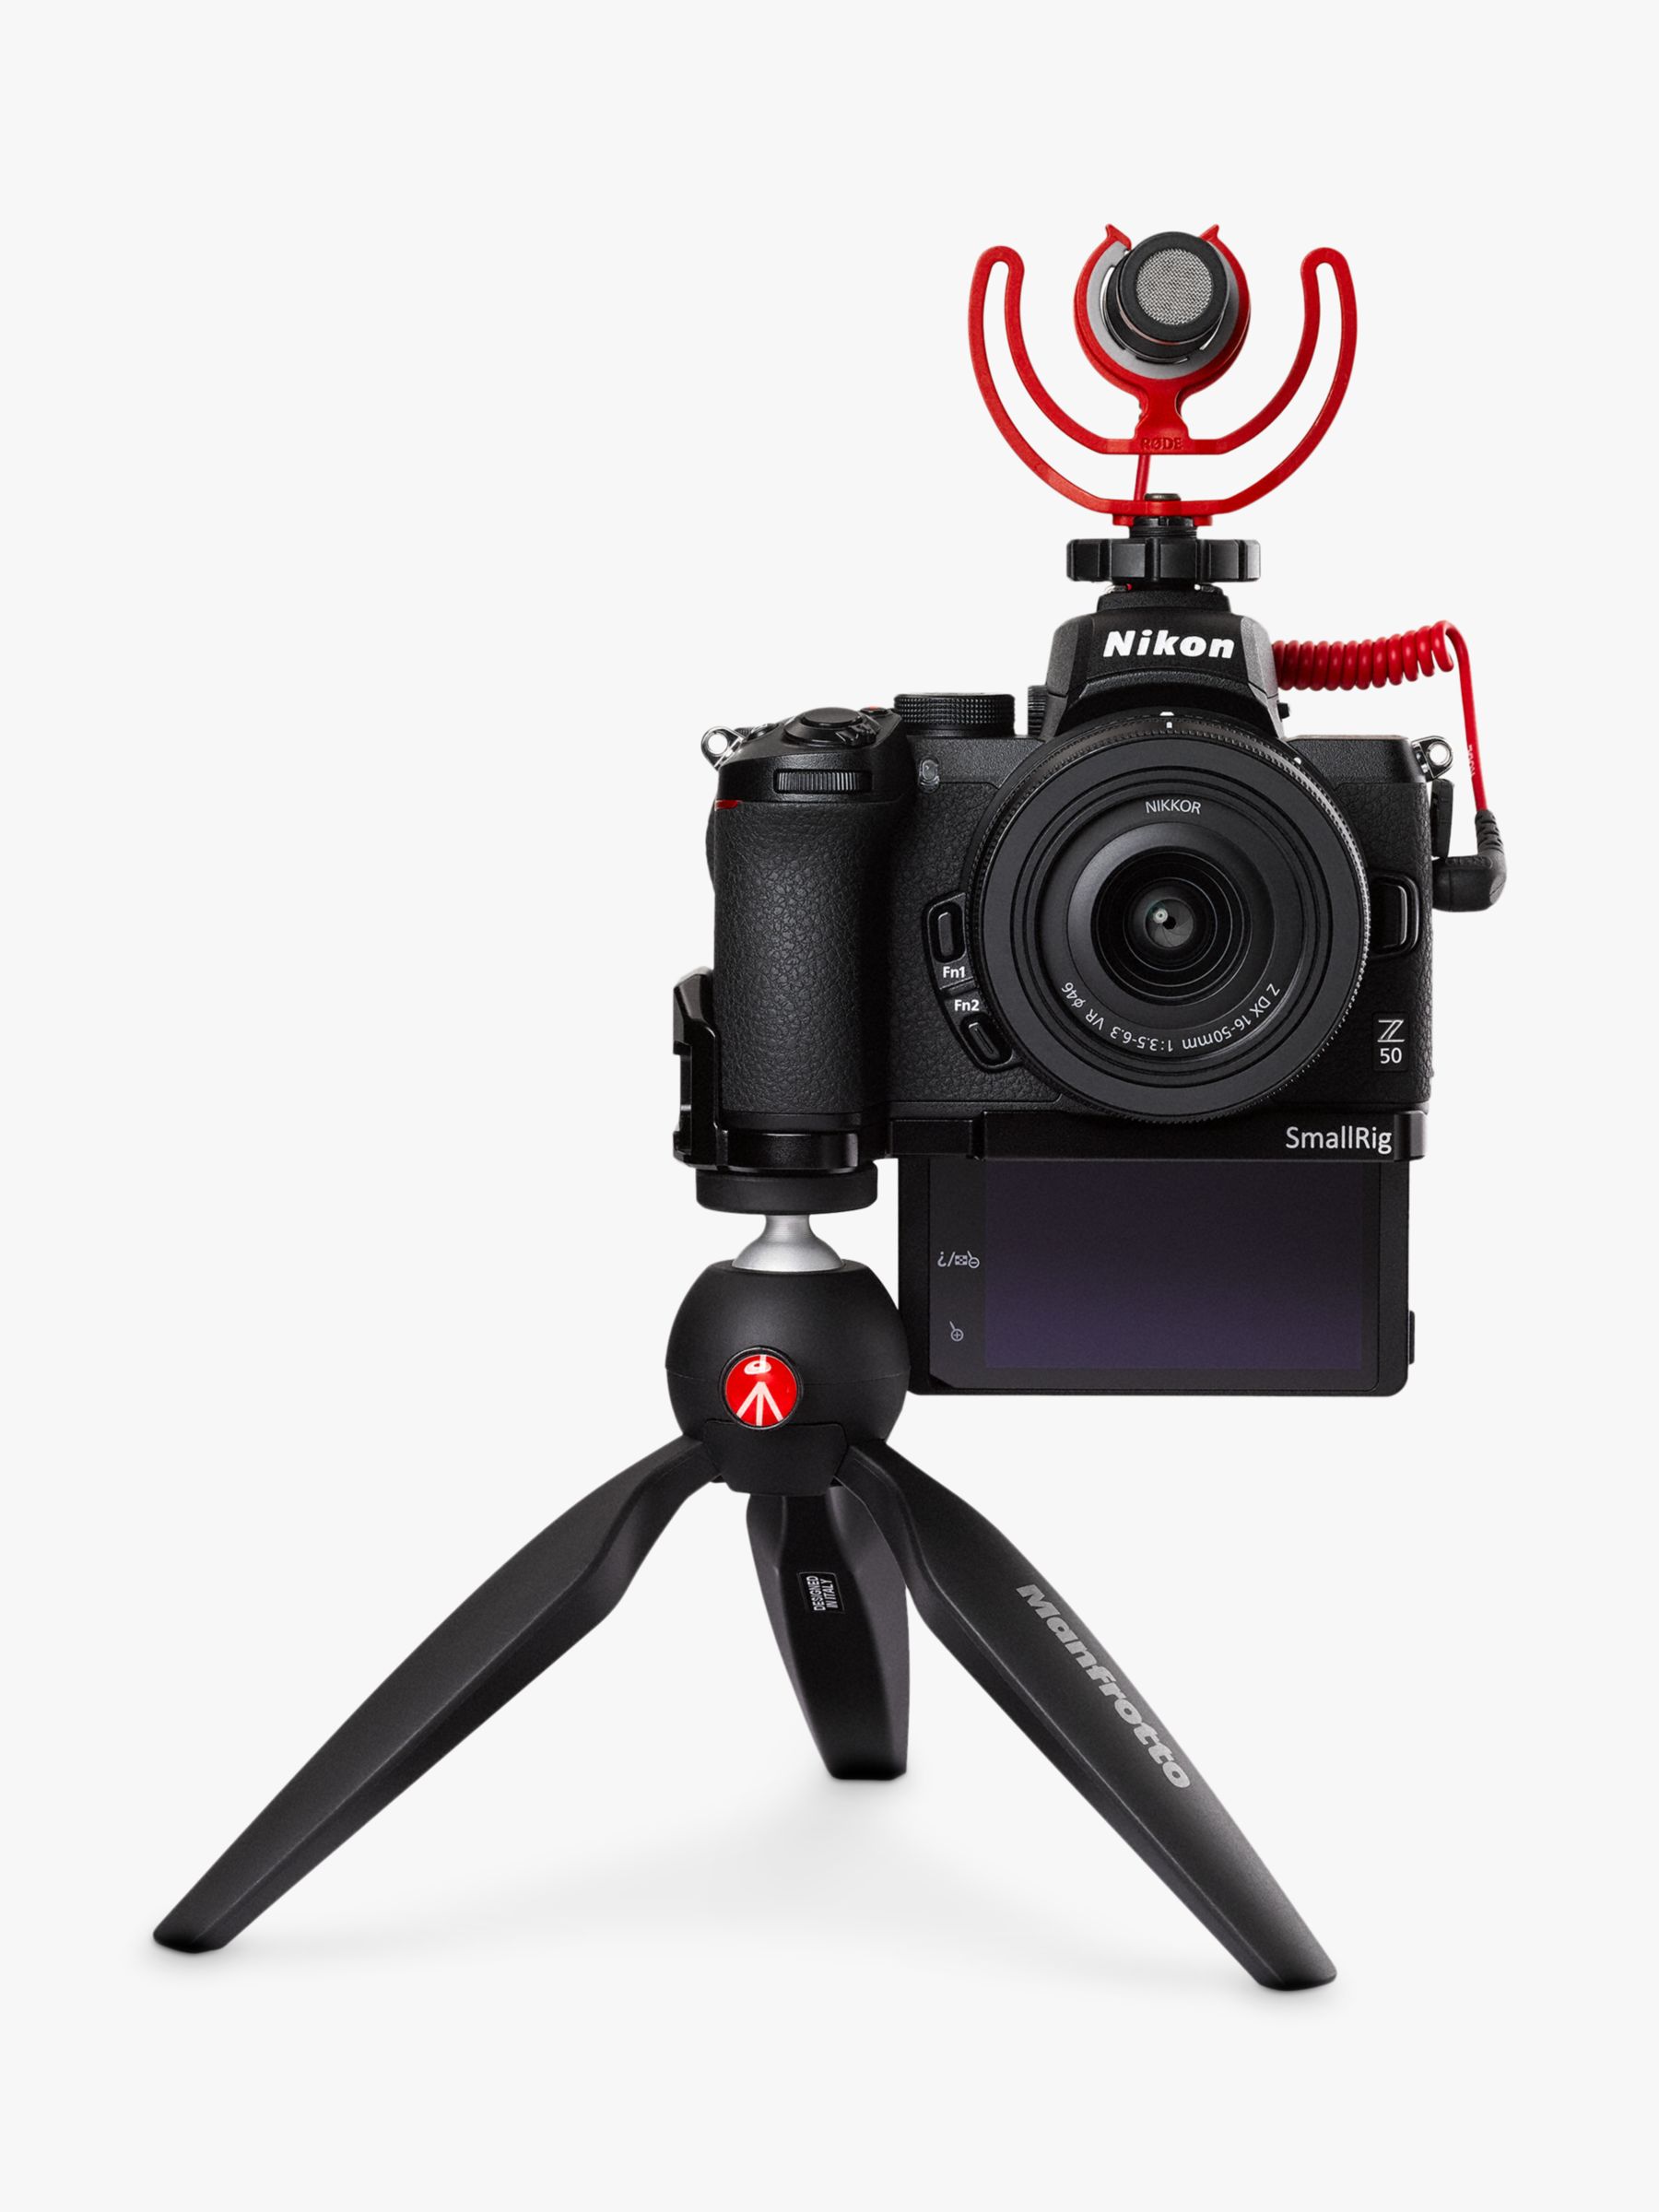 Image of Nikon Z50 Compact System Camera with 1650mm VR Lens 4K UHD 209MP WiFi Bluetooth OLED EVF and 32 Tiltable Touch Screen Vlogger Kit with Rode Microphone Manfrotto Mini Tripod and SmallRig Mounting Plate